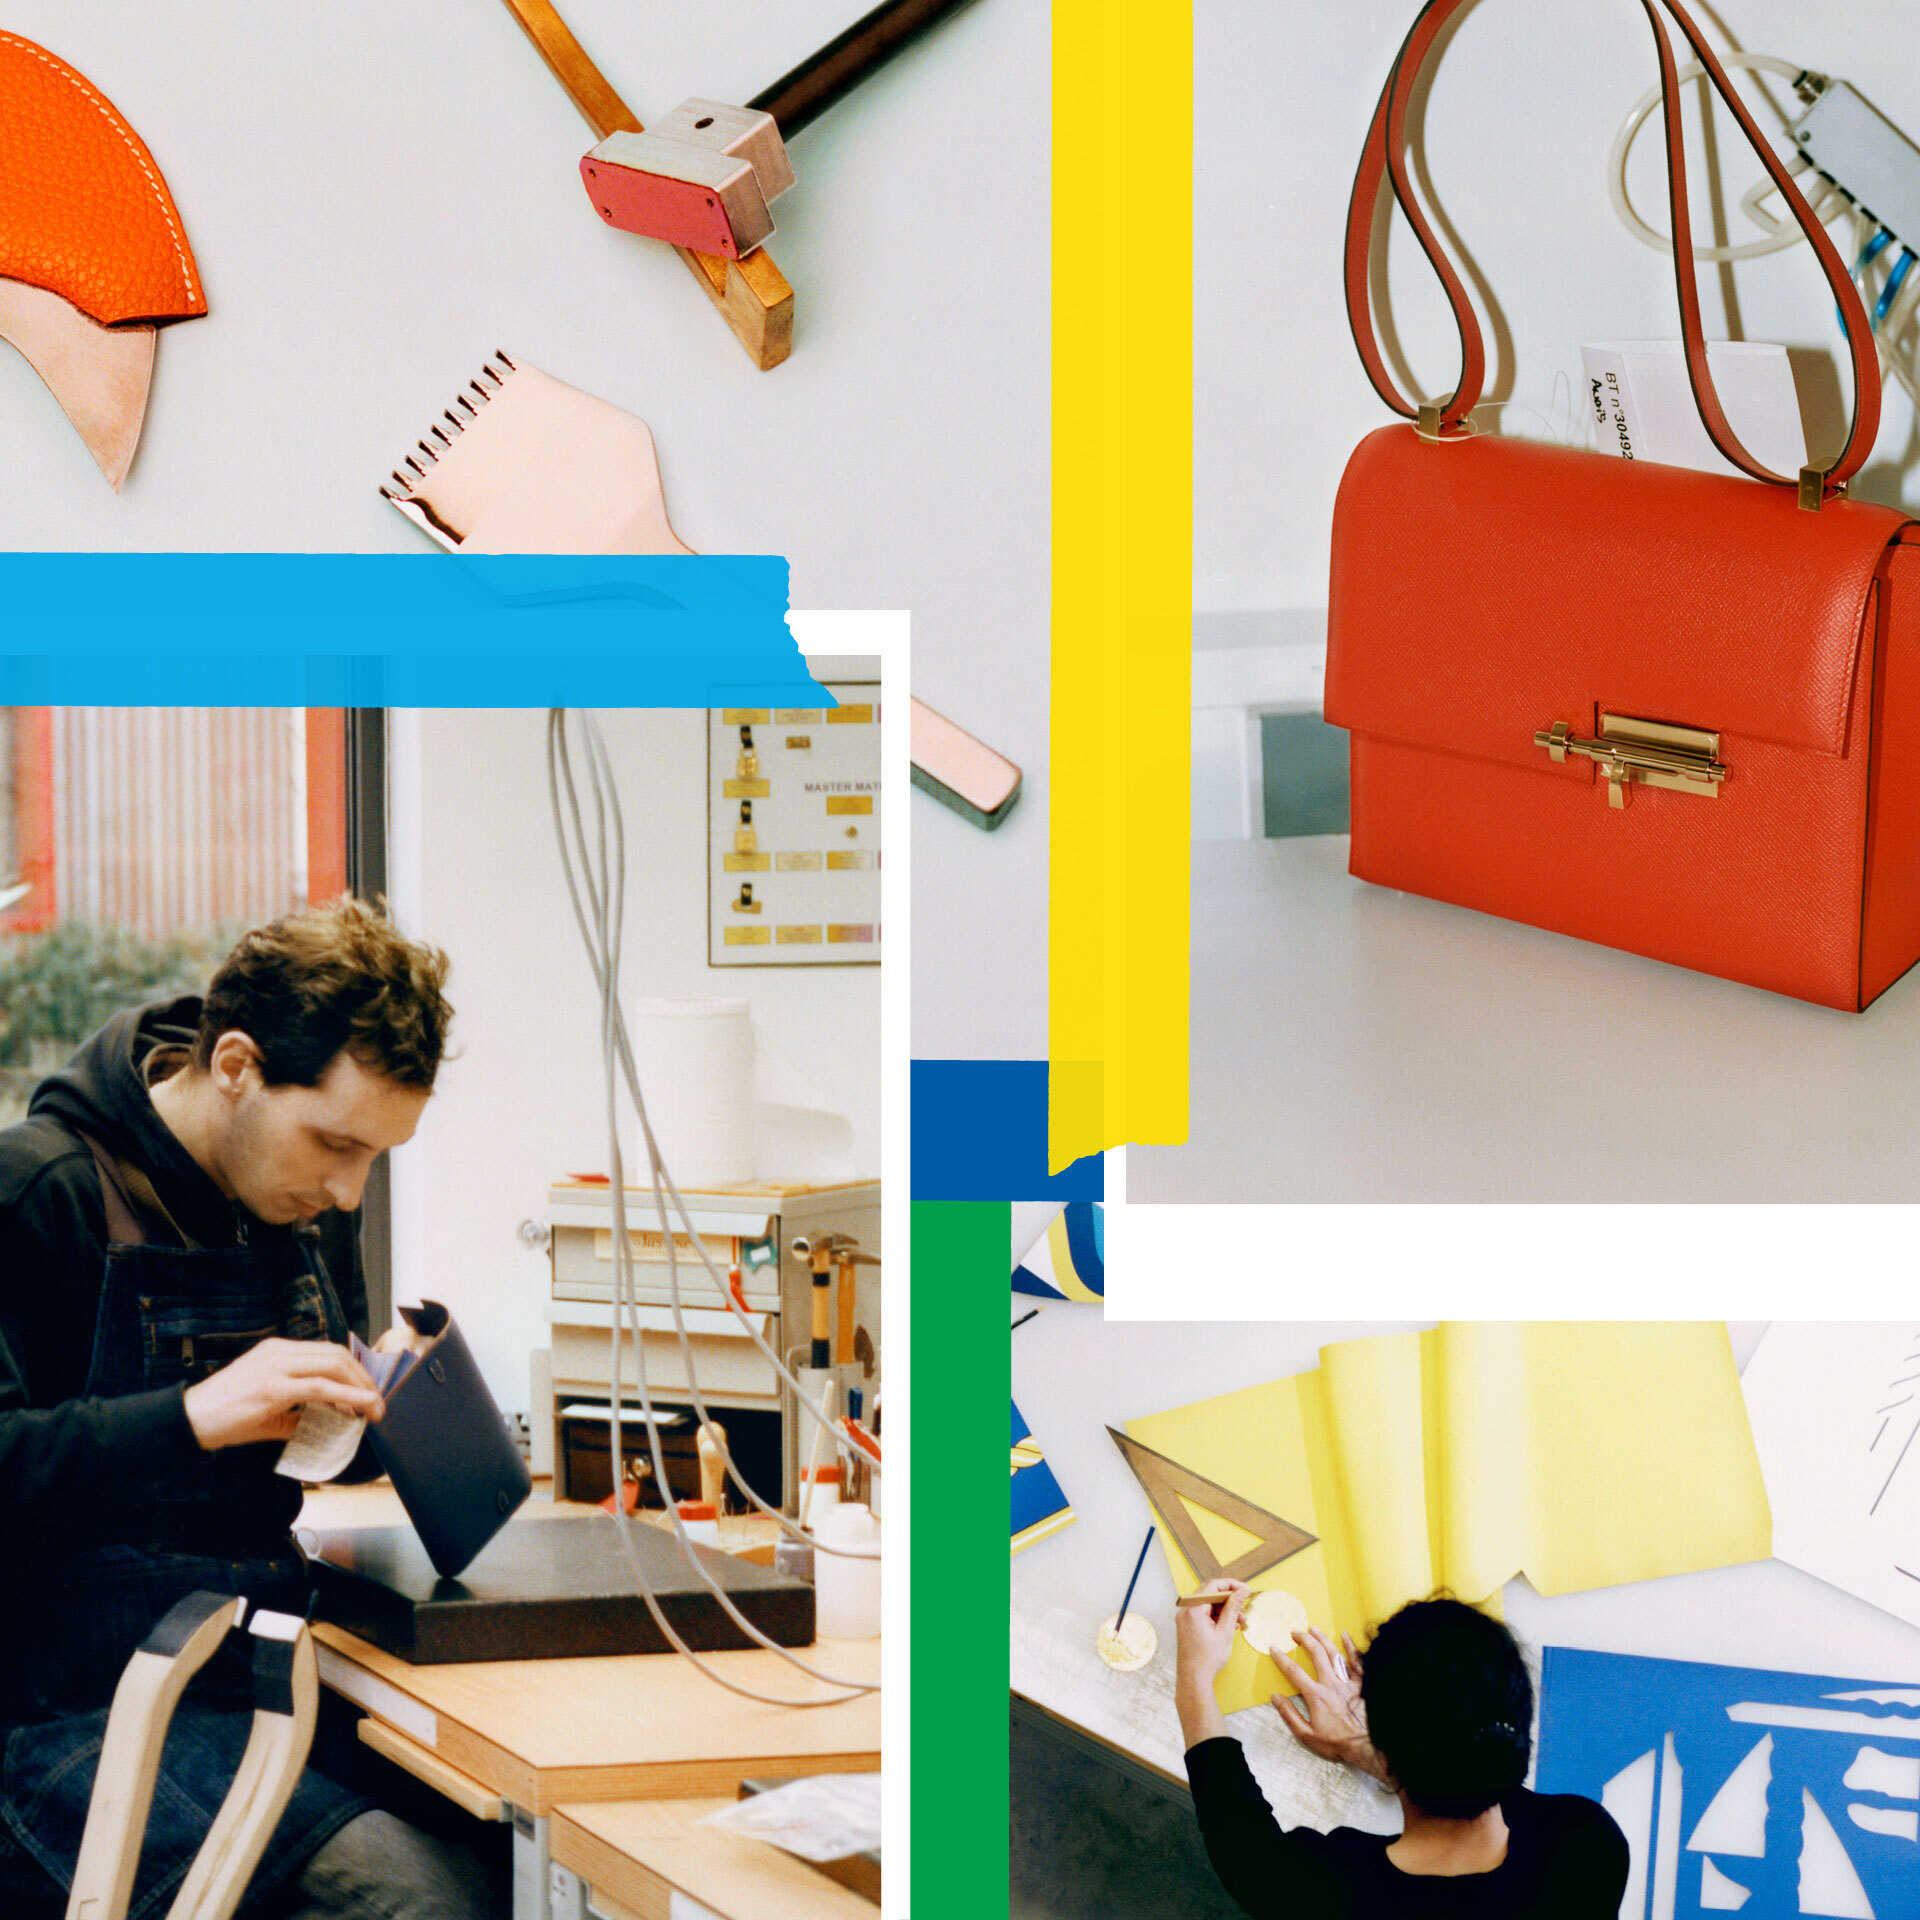 Hermès: Our opportunities